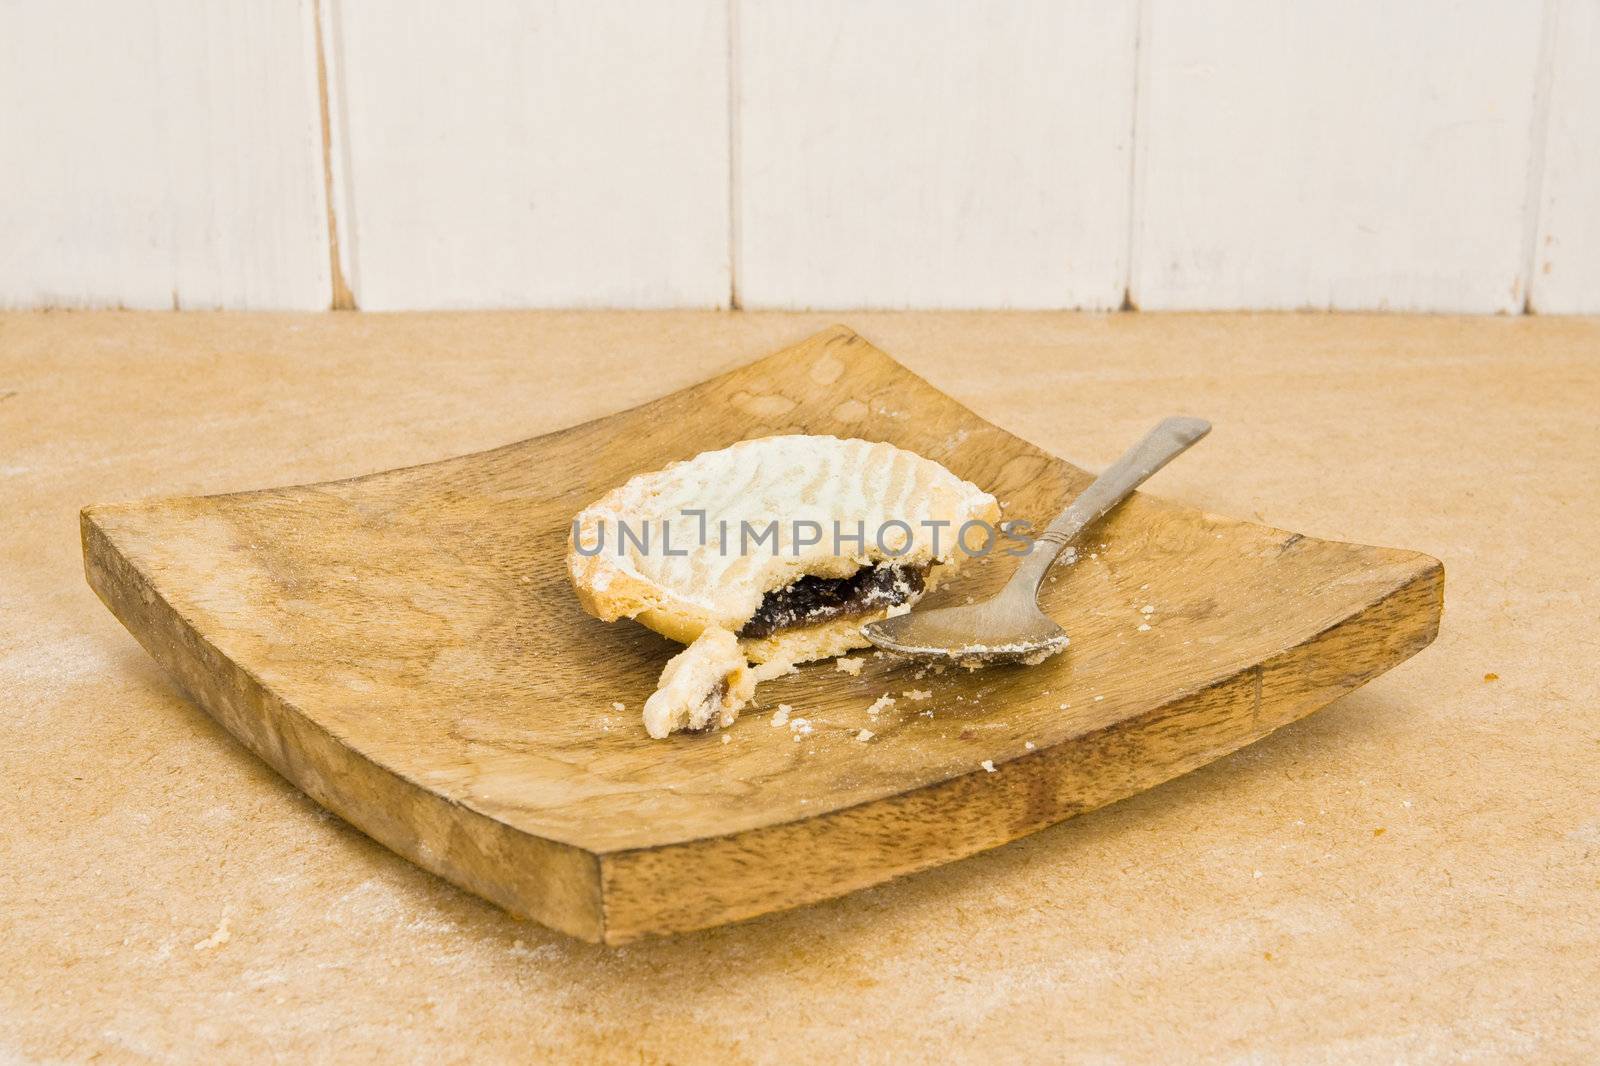 Unusual rustic image of a half-eaten mince pie on a wooden plate